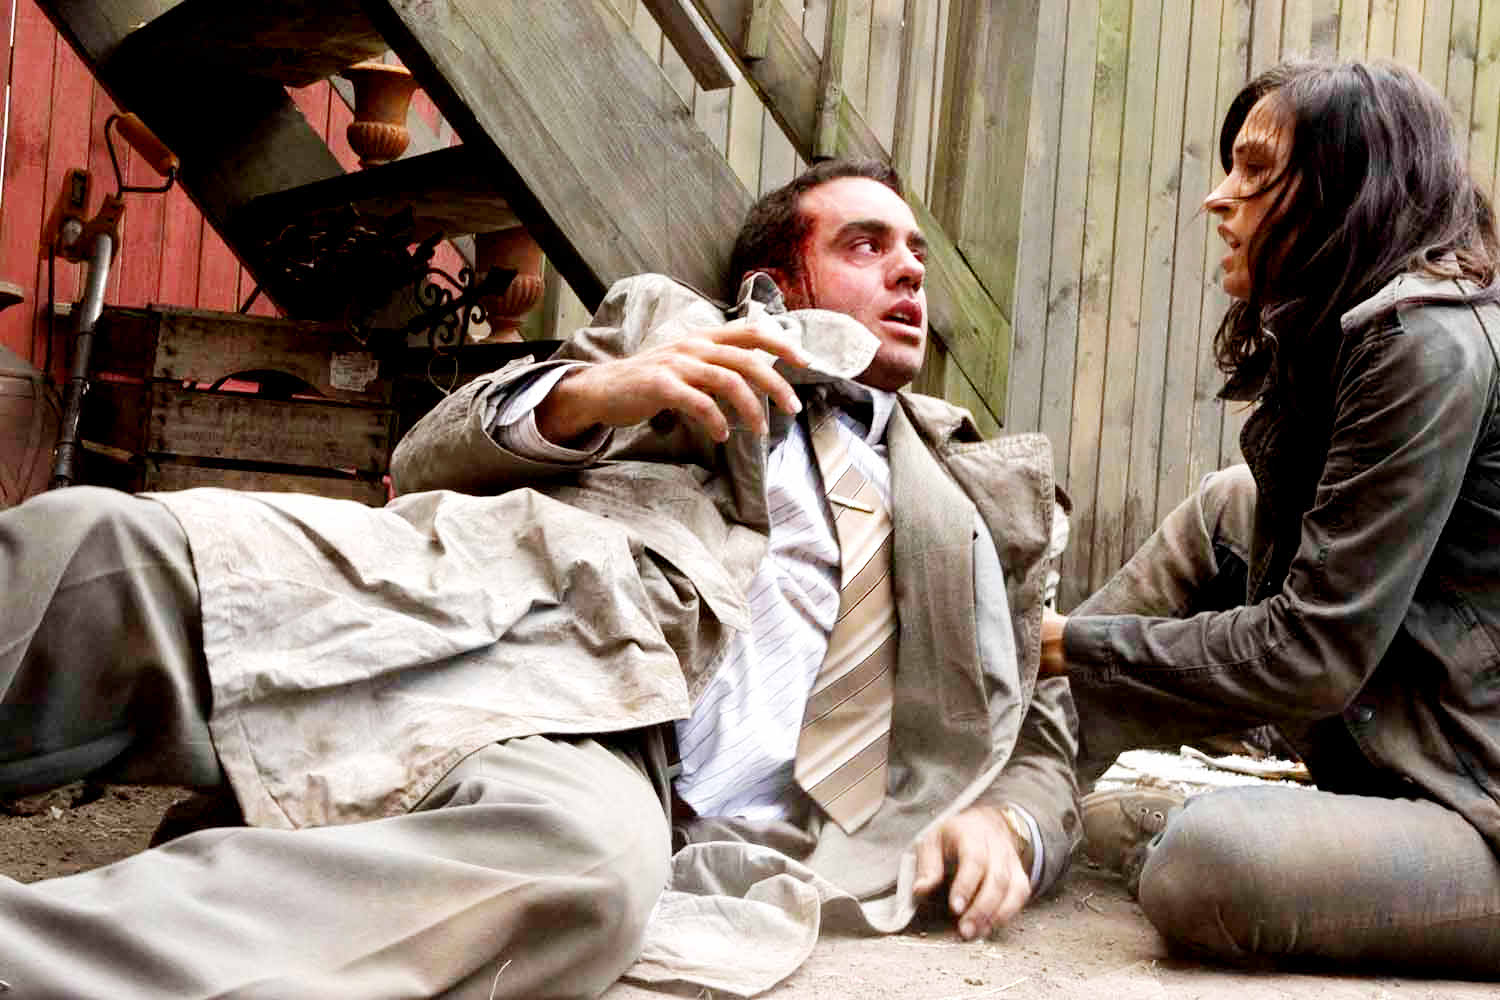 Bobby Cannavale stars as Shanks and Famke Janssen stars as Marnie Watson in Voltage Pictures' 100 Feet (2009)